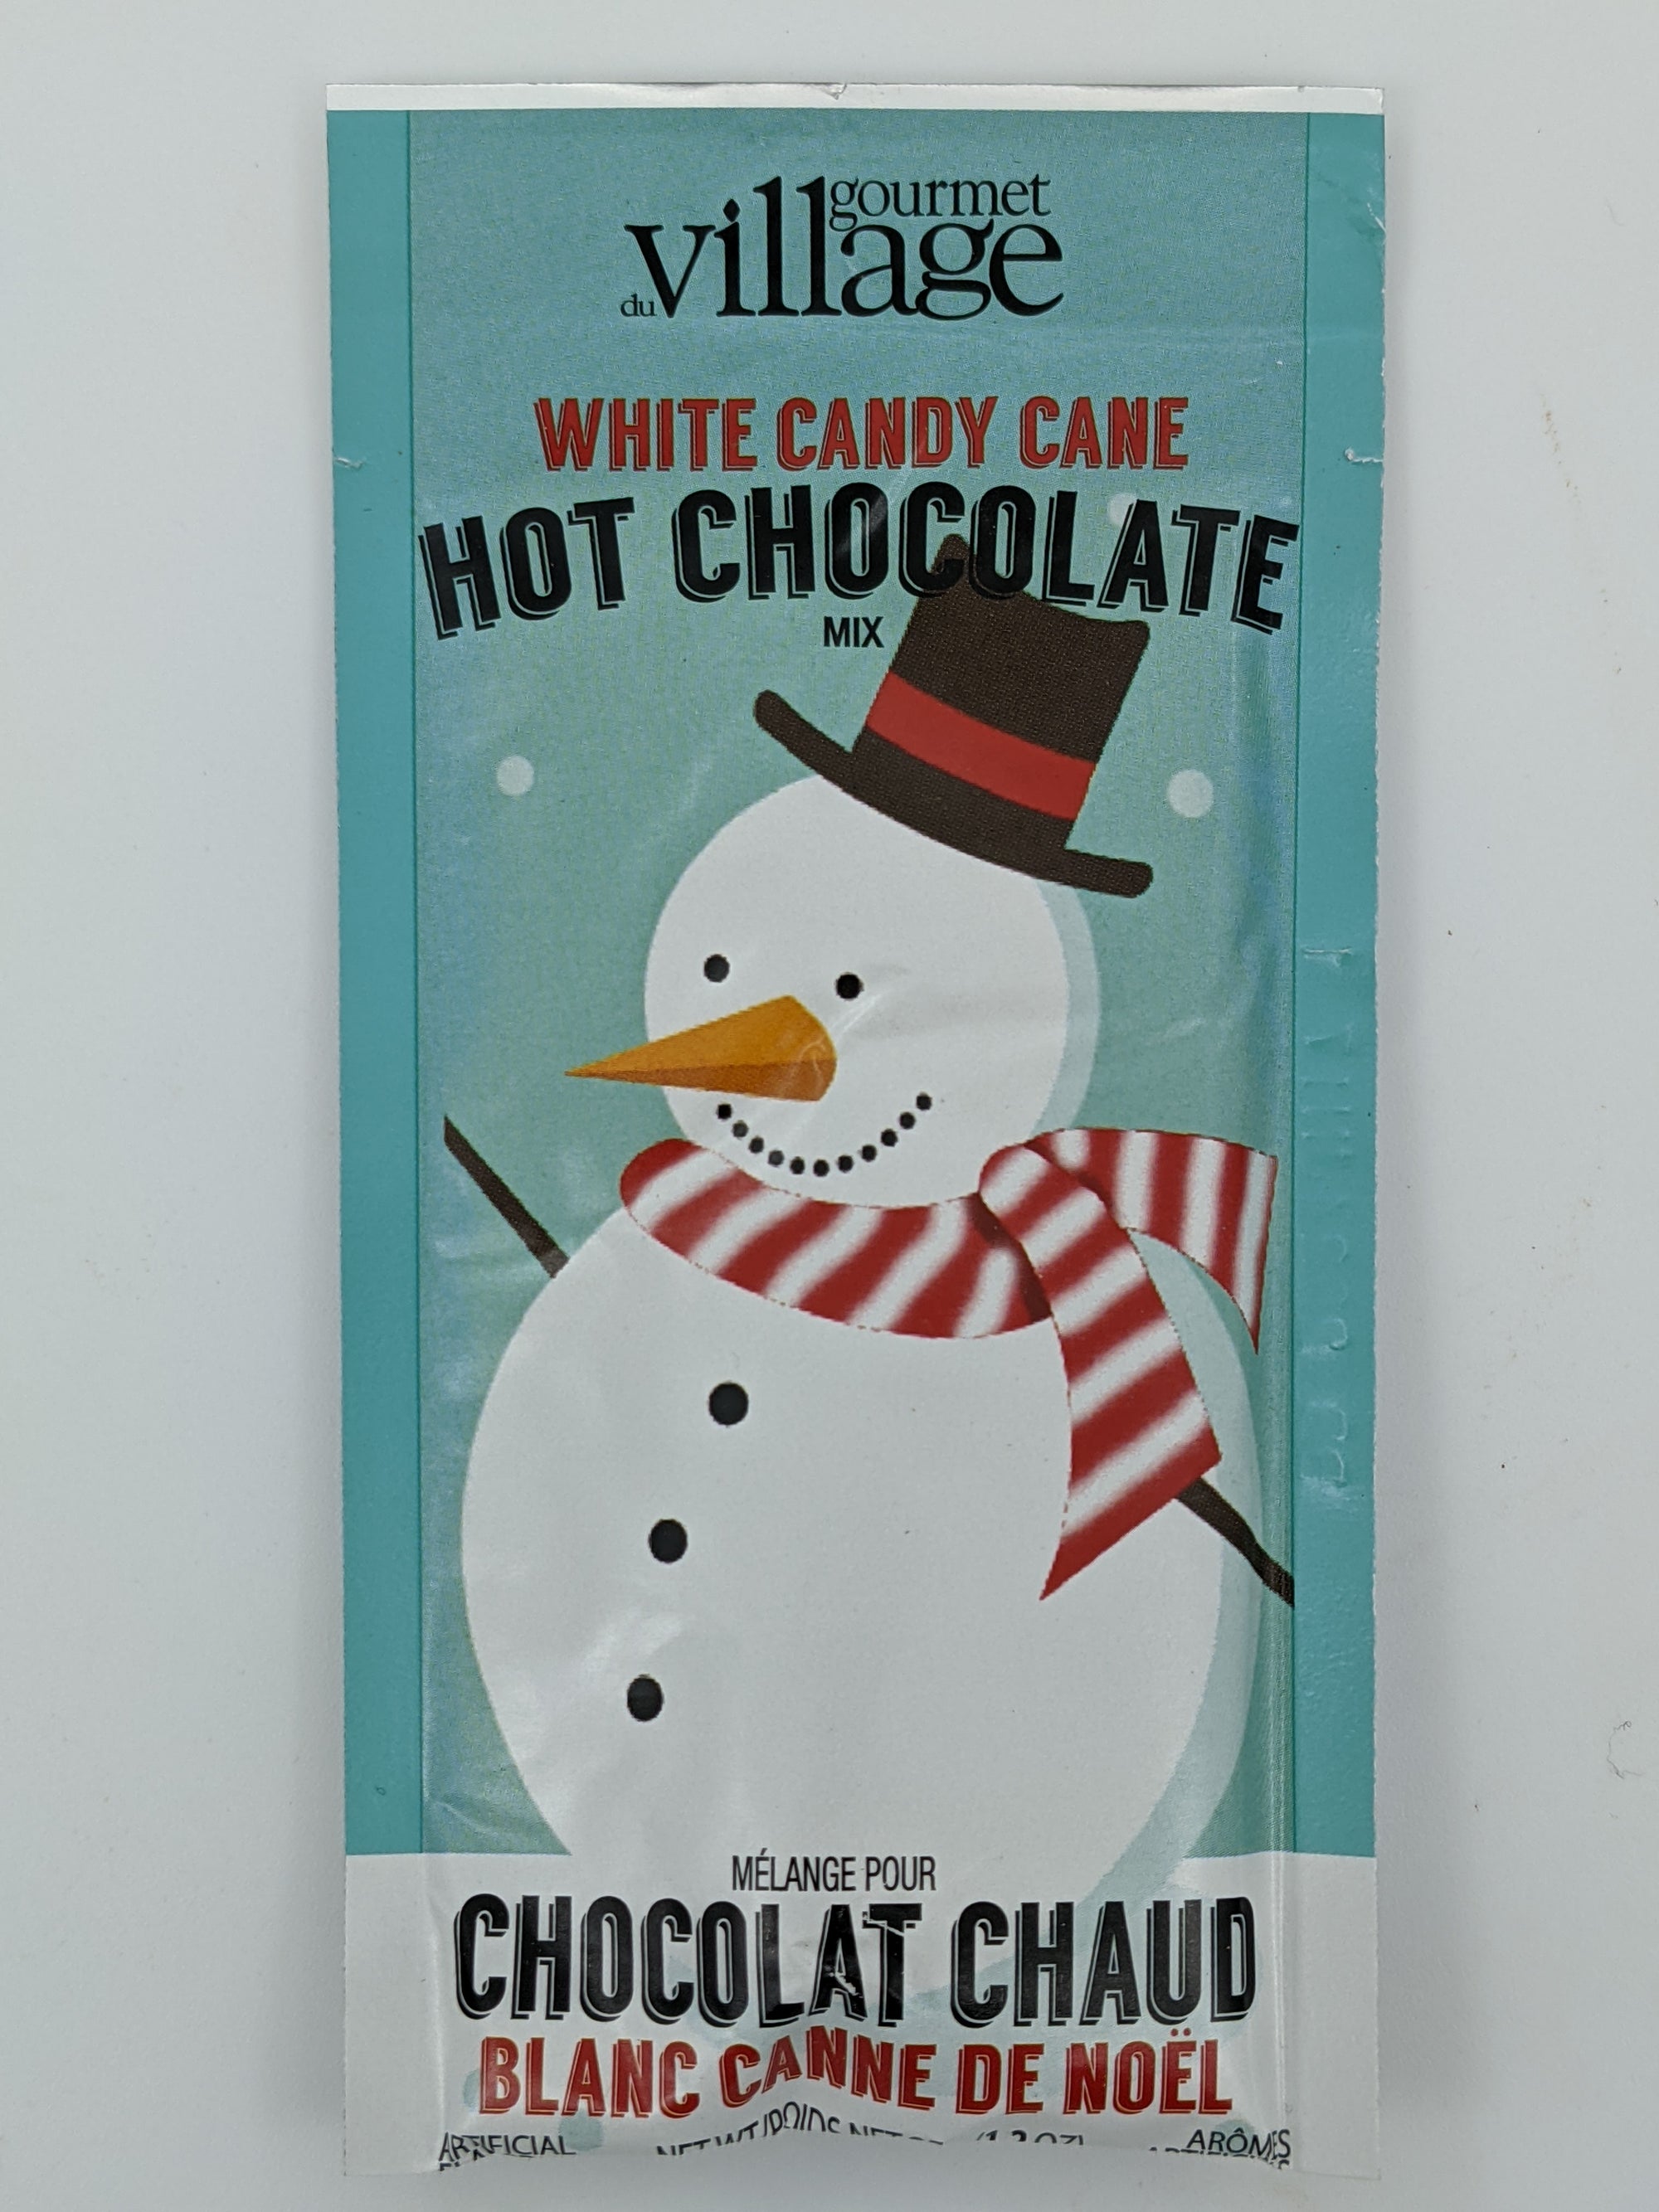 White Candy Cane Hot Chocolate